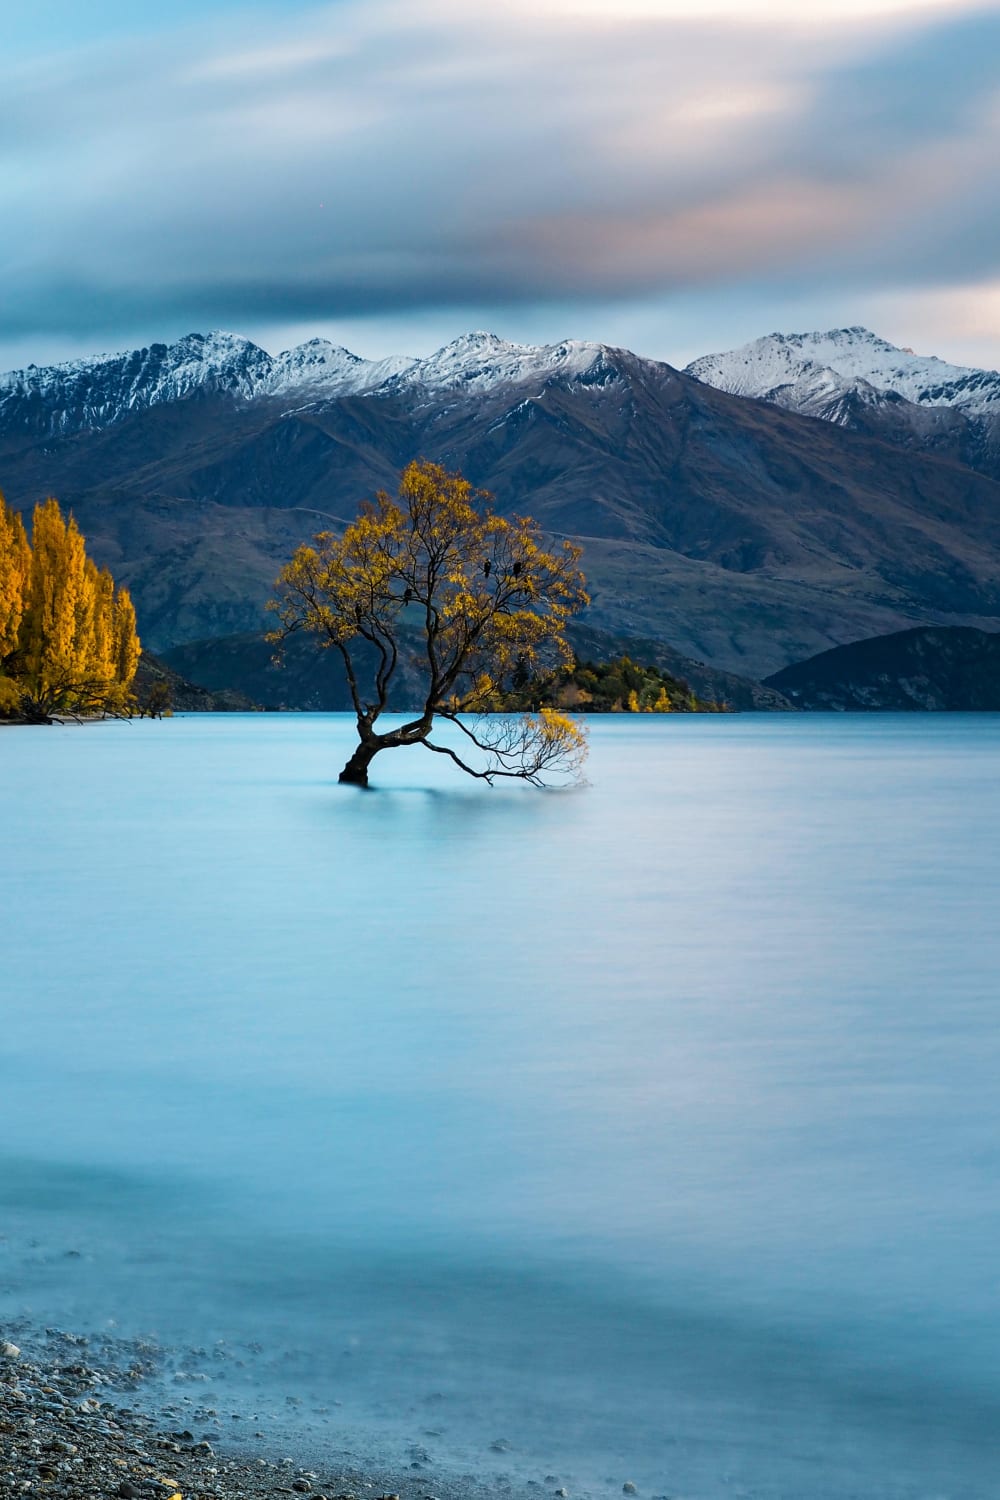 The Wanaka Tree on a cold autumn morning, New Zealand. (Photo credit to Kuno Schweizer)